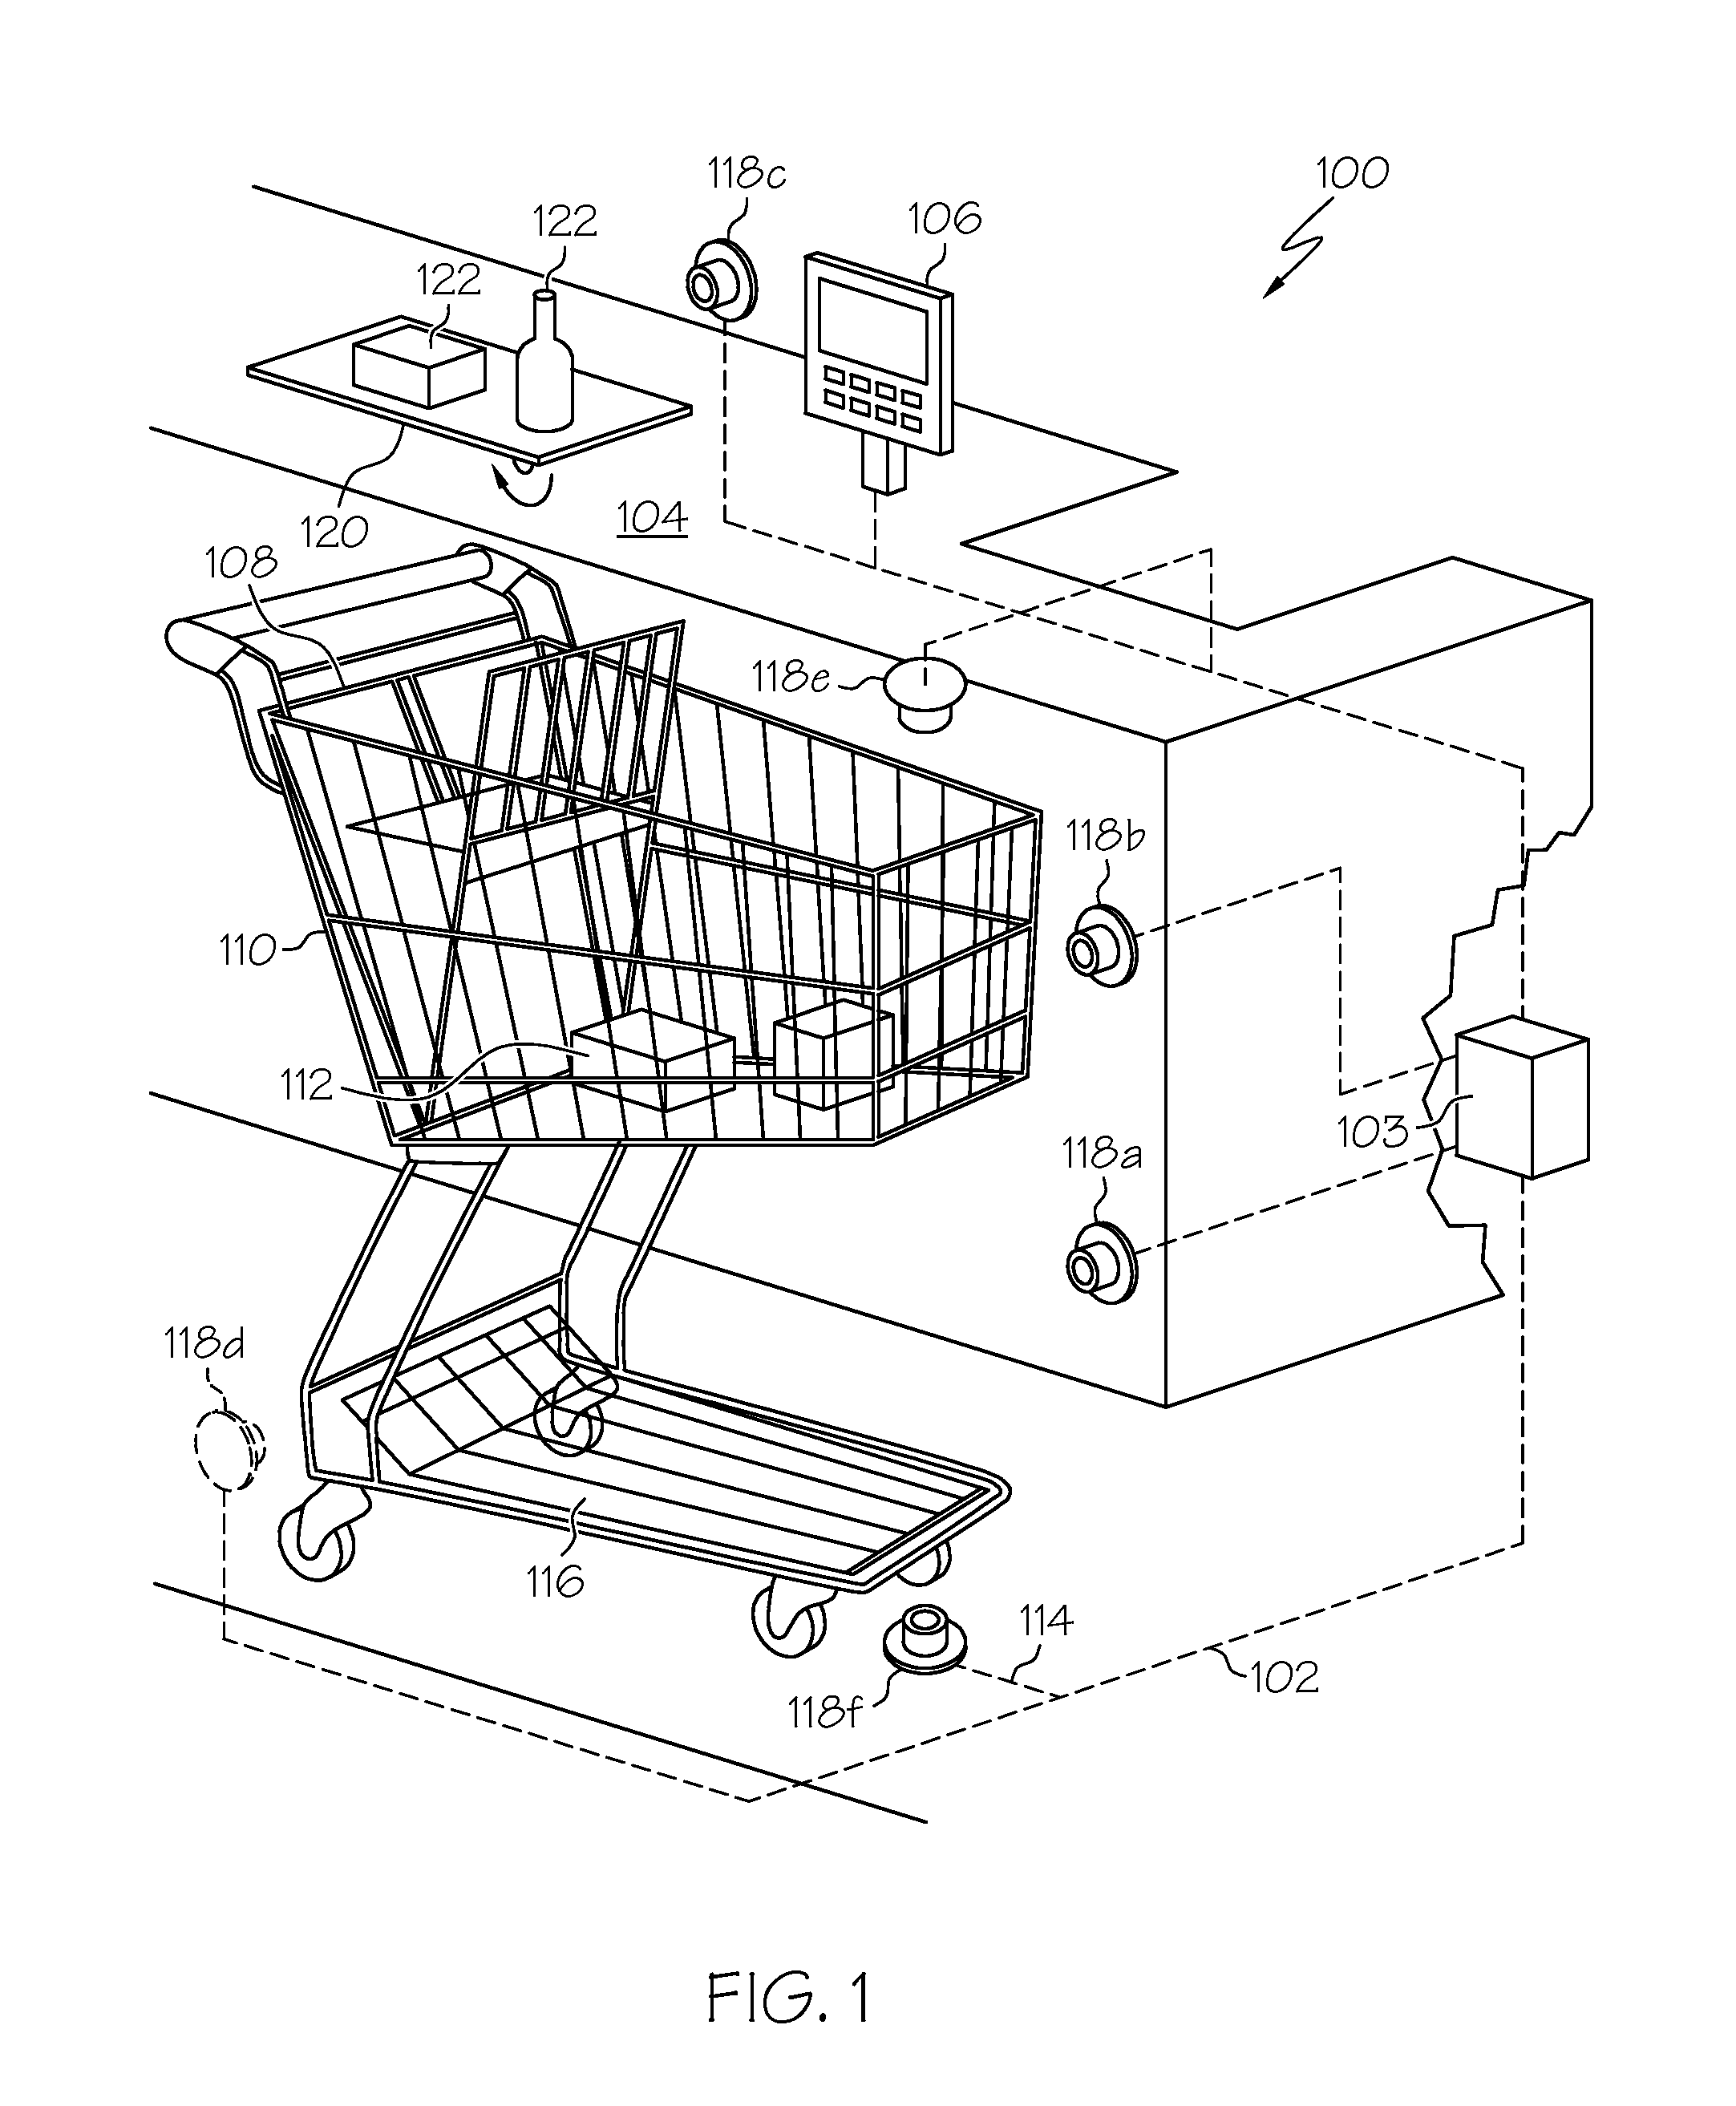 Method of merchandising for checkout lanes